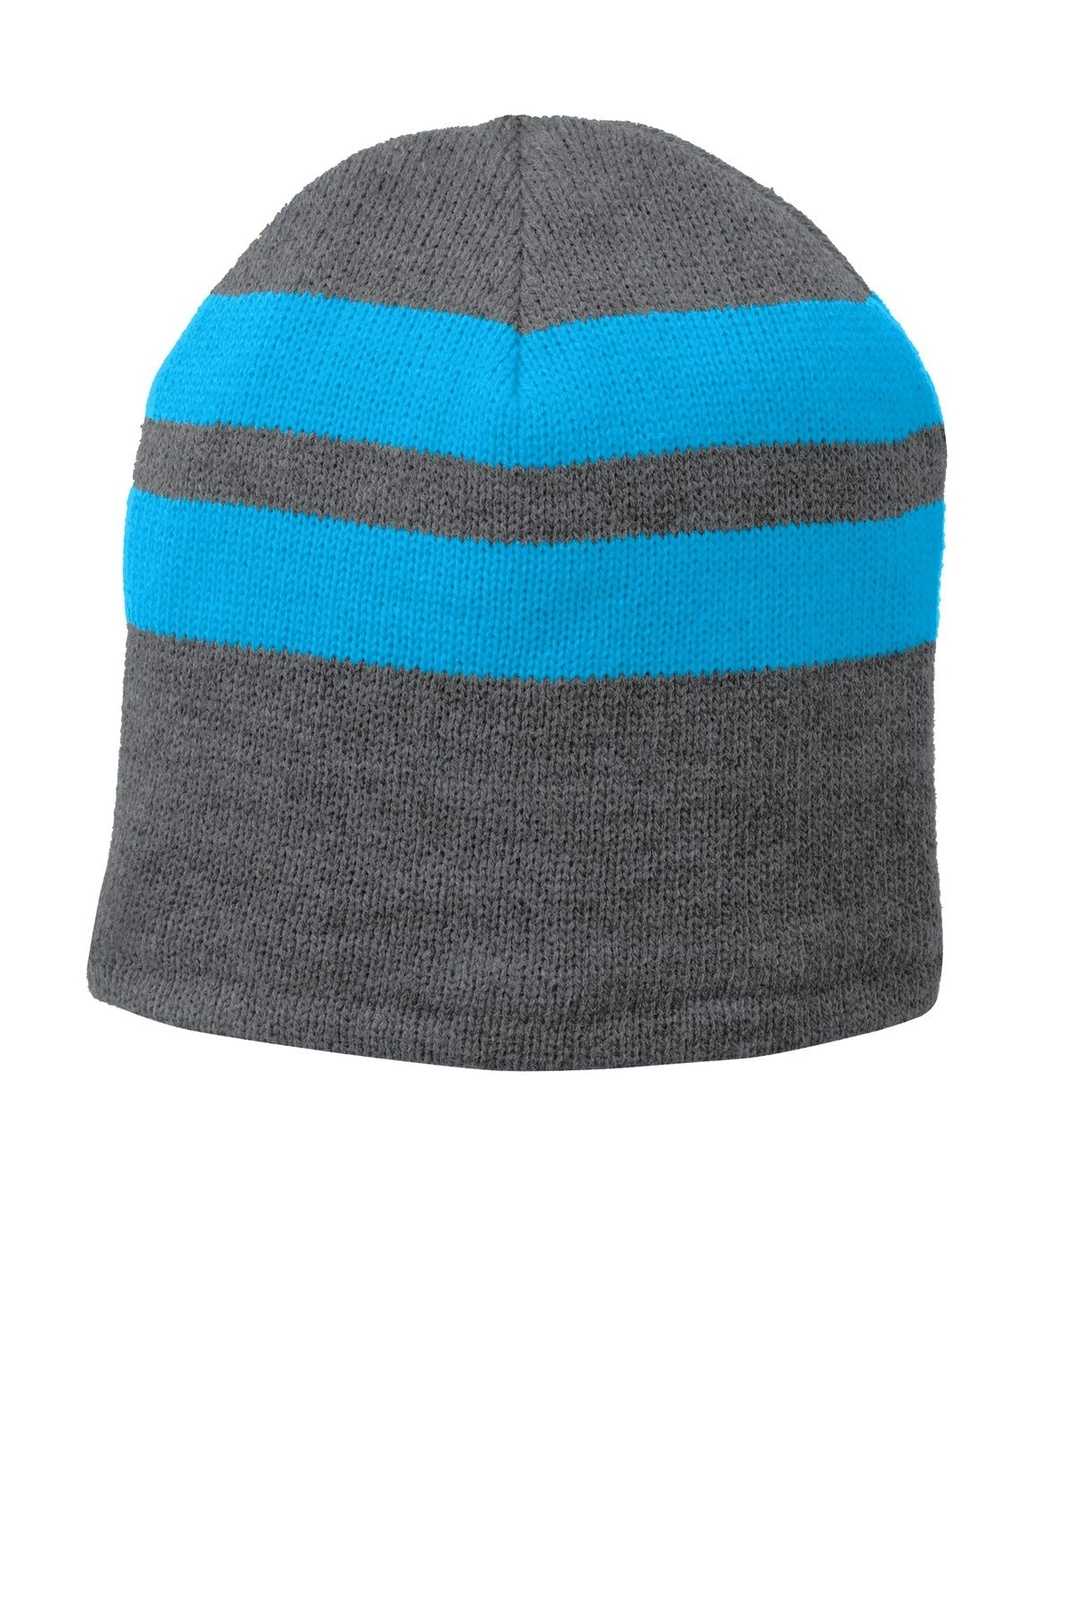 Port & Company C922 Fleece-Lined Striped Beanie Cap - Athletic Oxford Neon Blue - HIT a Double - 1